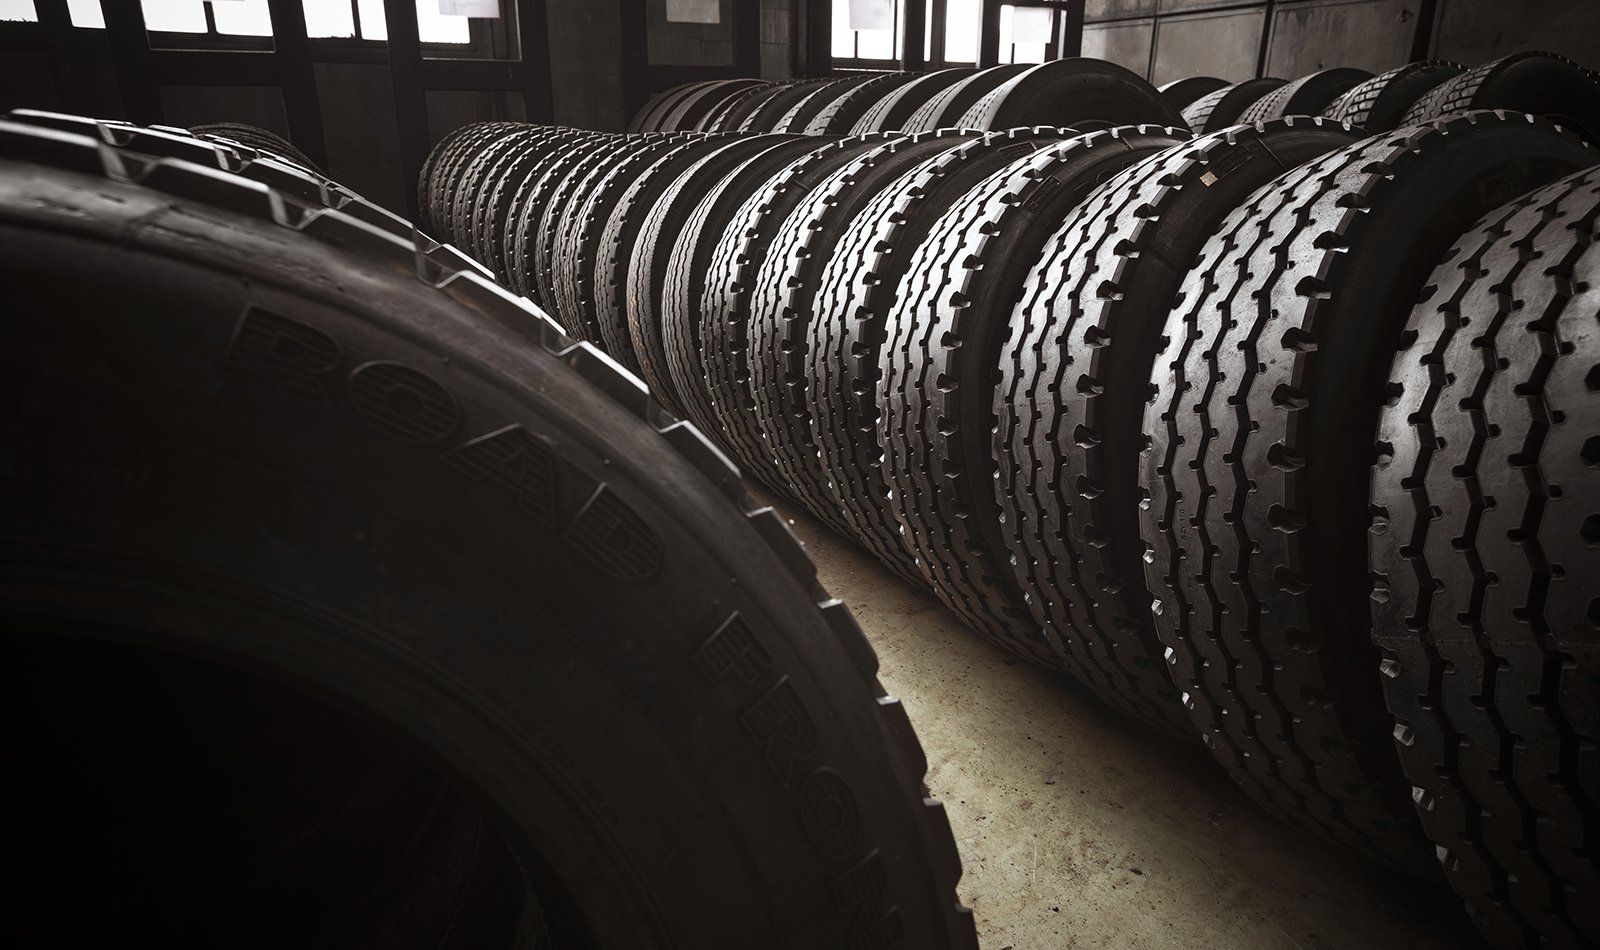 Commercial truck tires